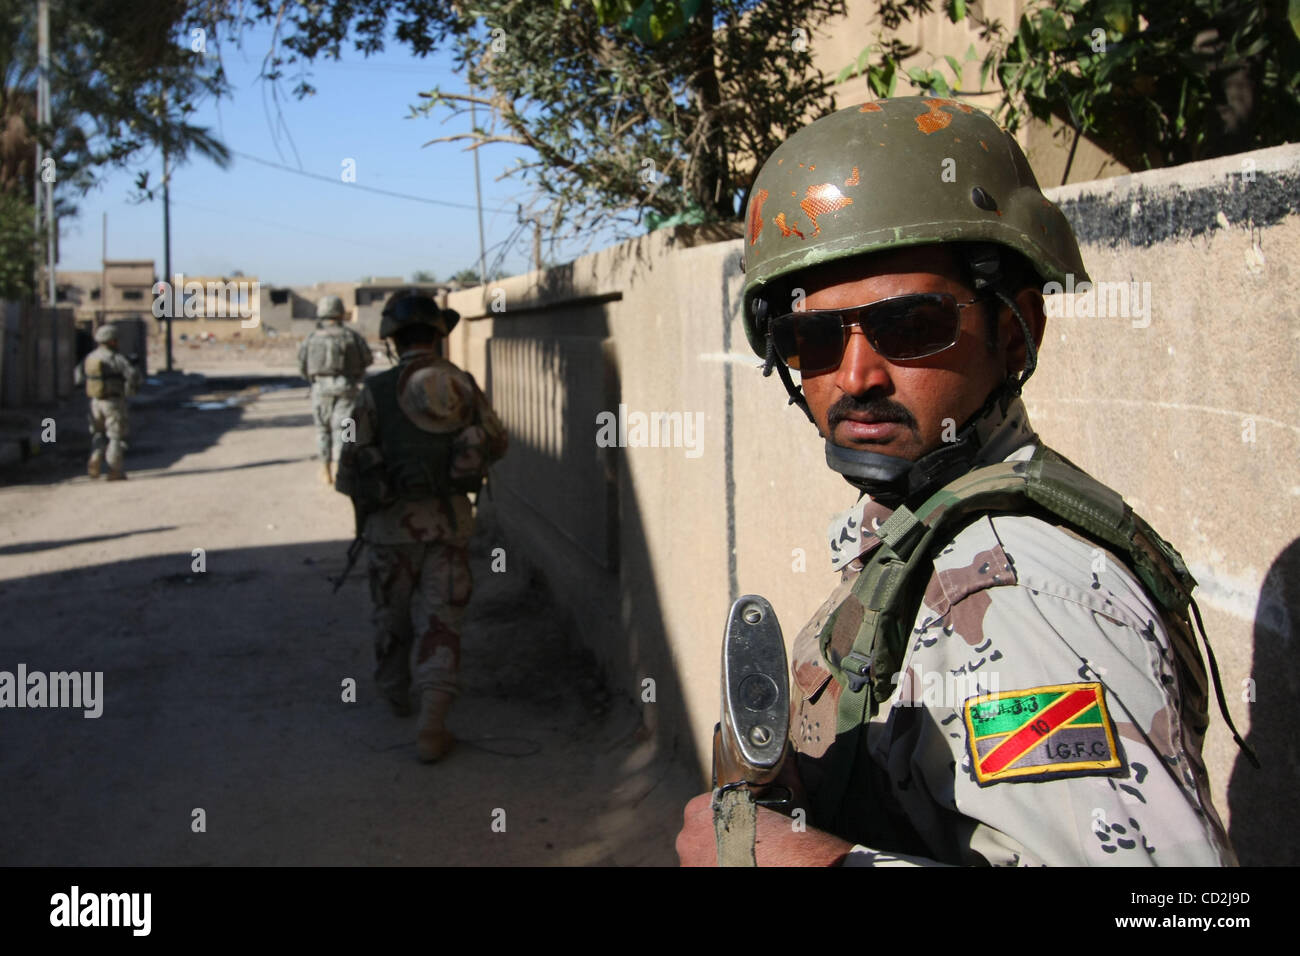 Mar 07, 2008 - Dora district, Baghdad, Iraq - An Iraqi soldier is conducting a joint patrol with US forces in the Dora District of Baghdad. (Credit Image: © Simon Klingert/ZUMA Press) RESTRICTIONS: * Germany Rights OUT * Stock Photo